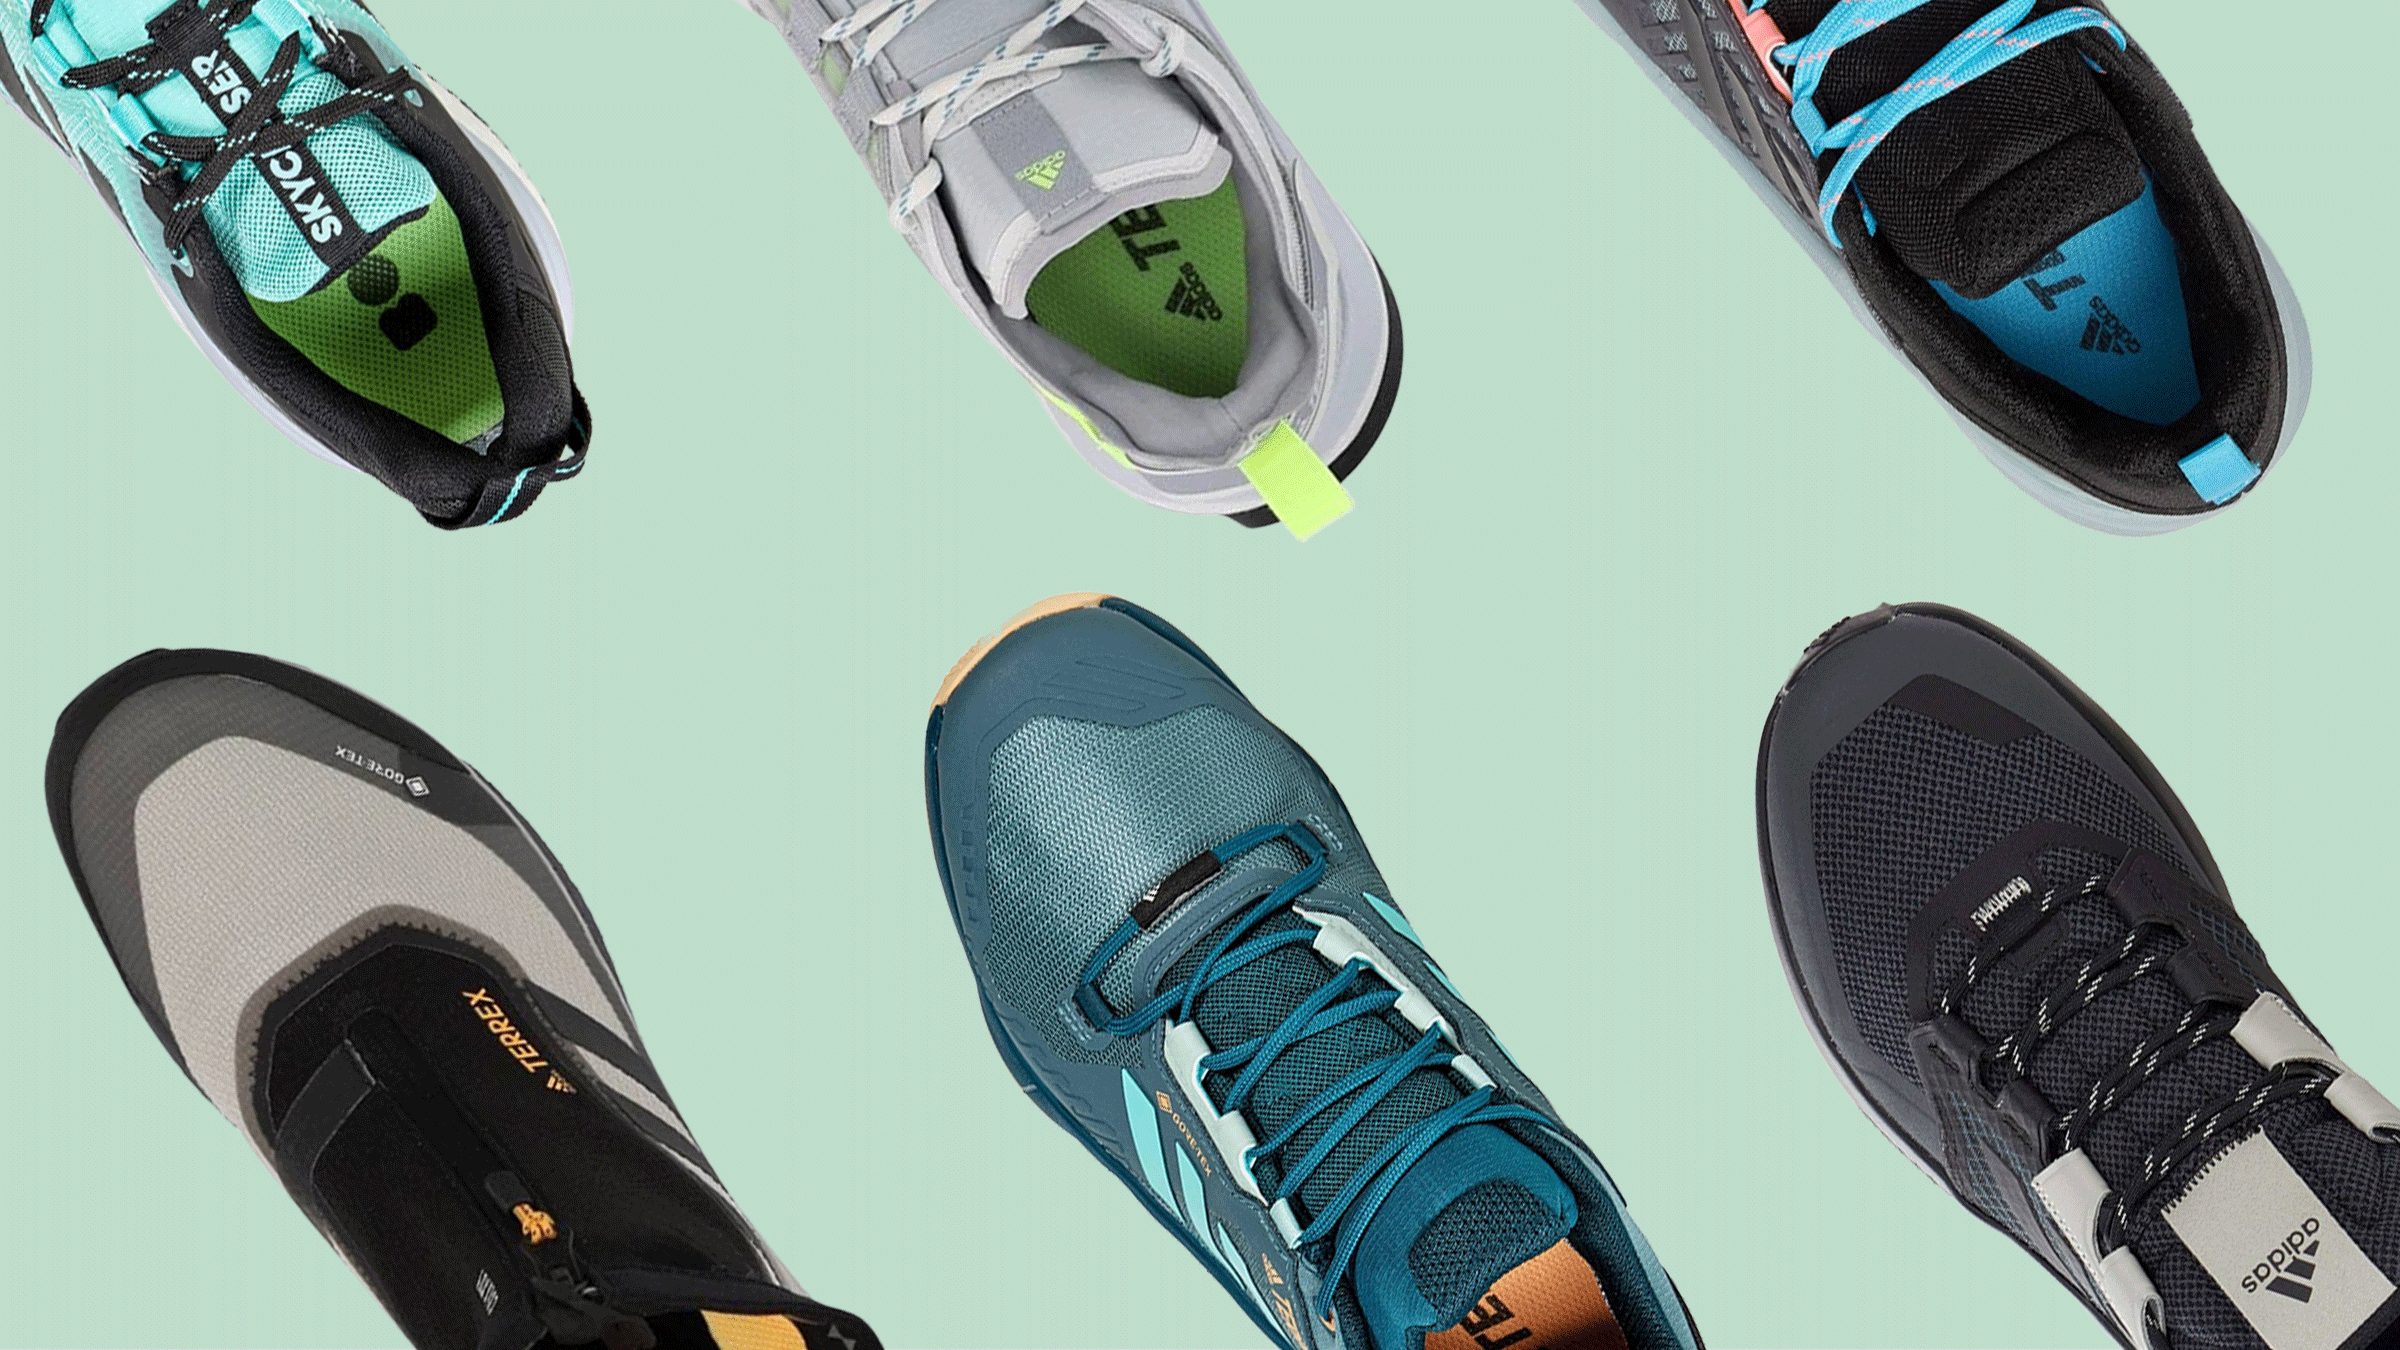 Shining to call electrode 7 Best Adidas Hiking Shoes For Women, 20+ Shoes Tested in 2023 | RunRepeat